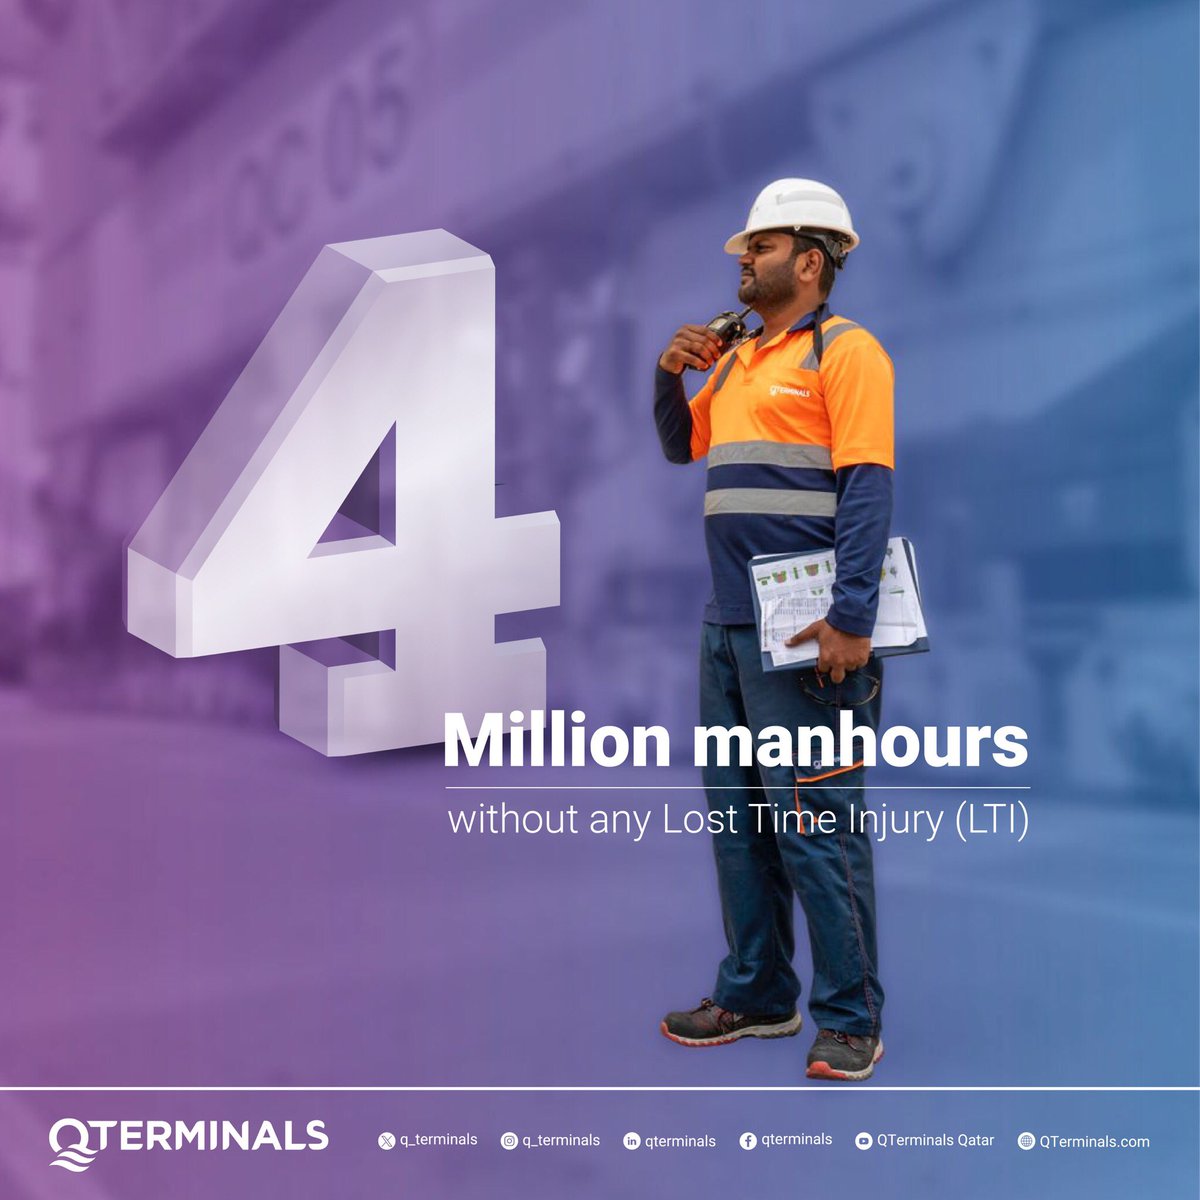 #QTerminals is very proud to announce that #HamadPort Operations achieved 4 million man-hours without any Lost Time Injury (LTI). Together we can achieve milestones, ensuring the safety of Hamad Port employees, and visitors alike. #Qatar